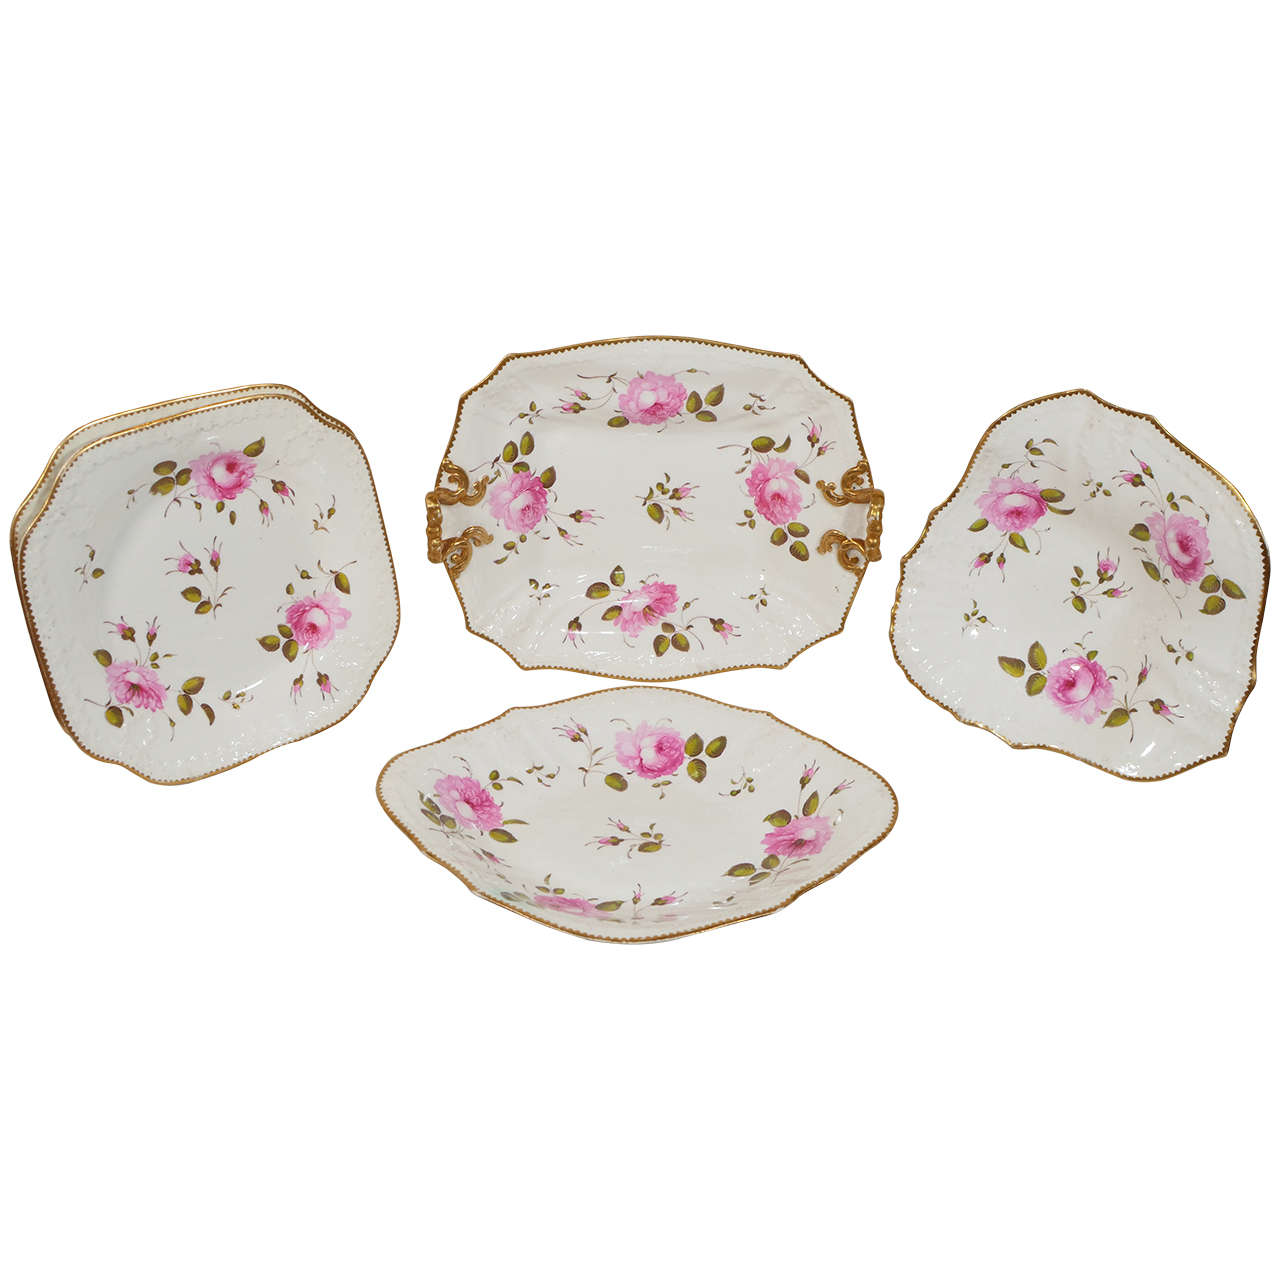 A Set of Sixteen Dishes: A Dessert Service Decorated with Pink Roses